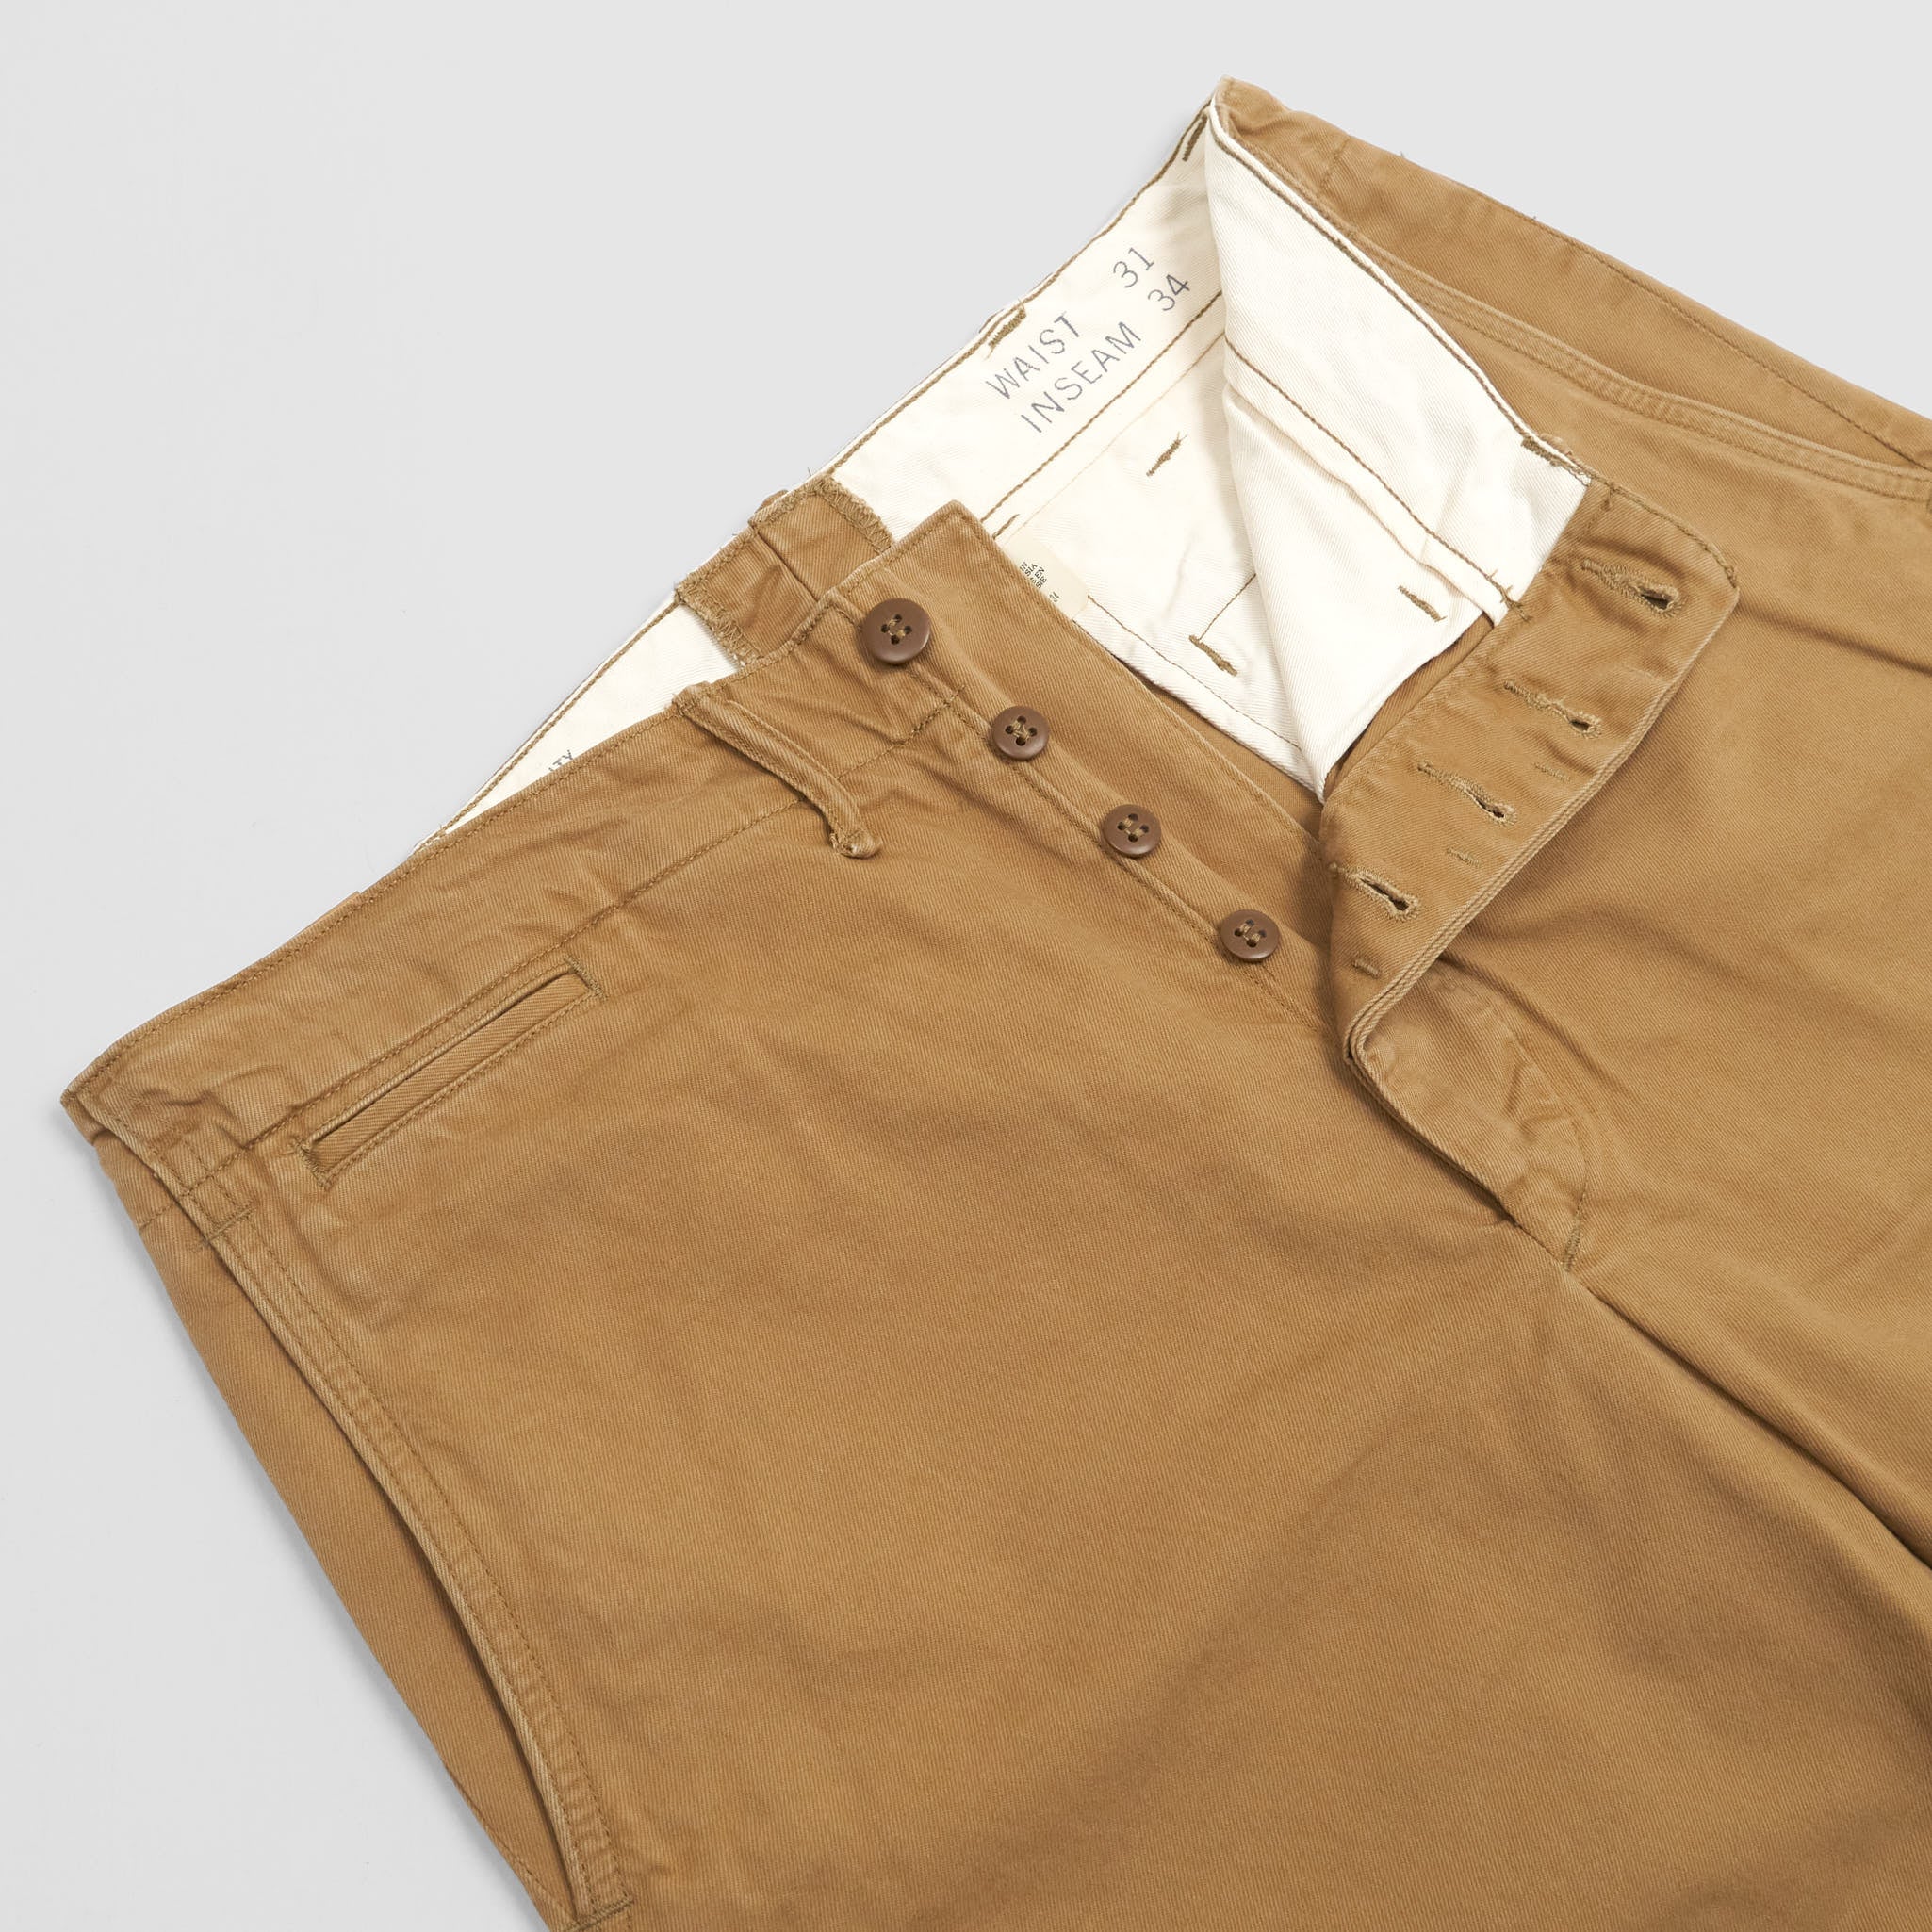 Double RL Officers Classic Chinos Straight Cut - DeeCee style